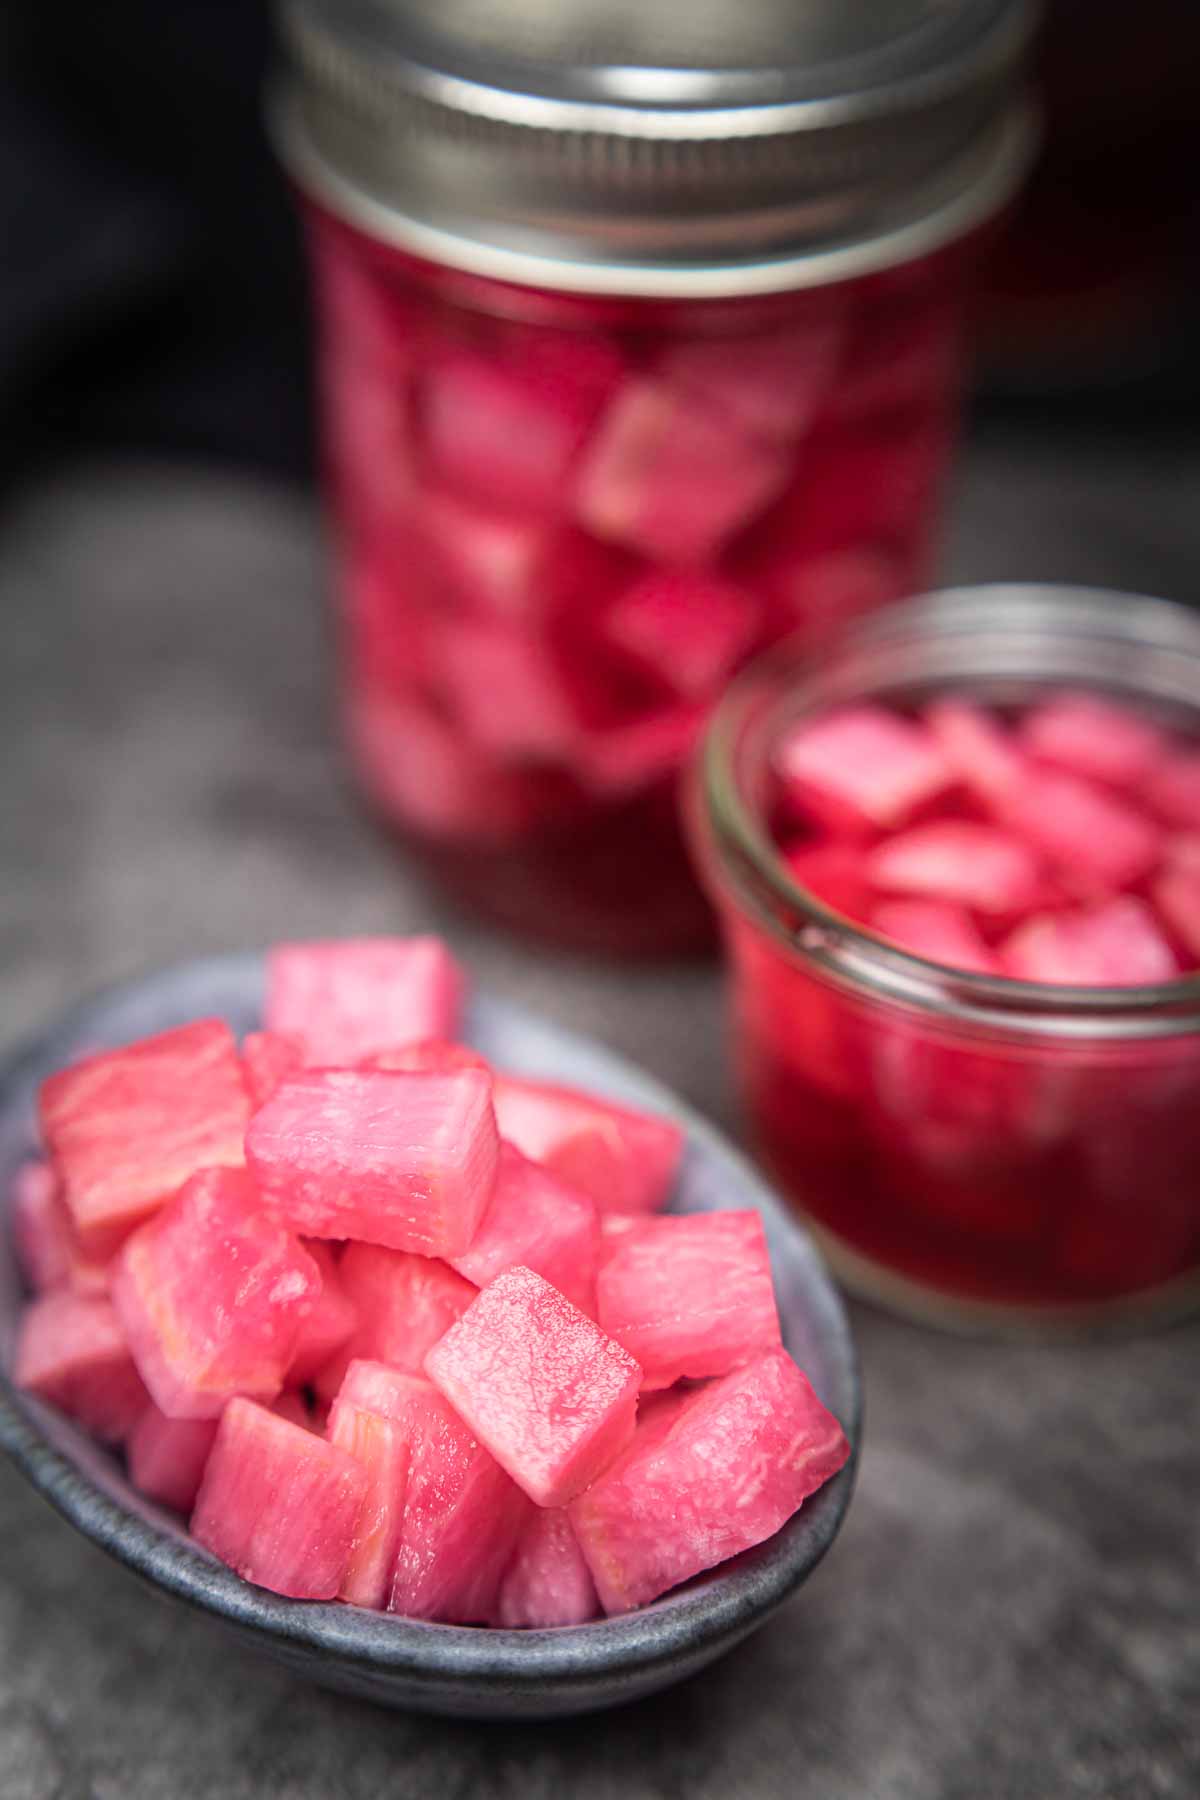 Pickled radish flavored with beetroot in a bowl.